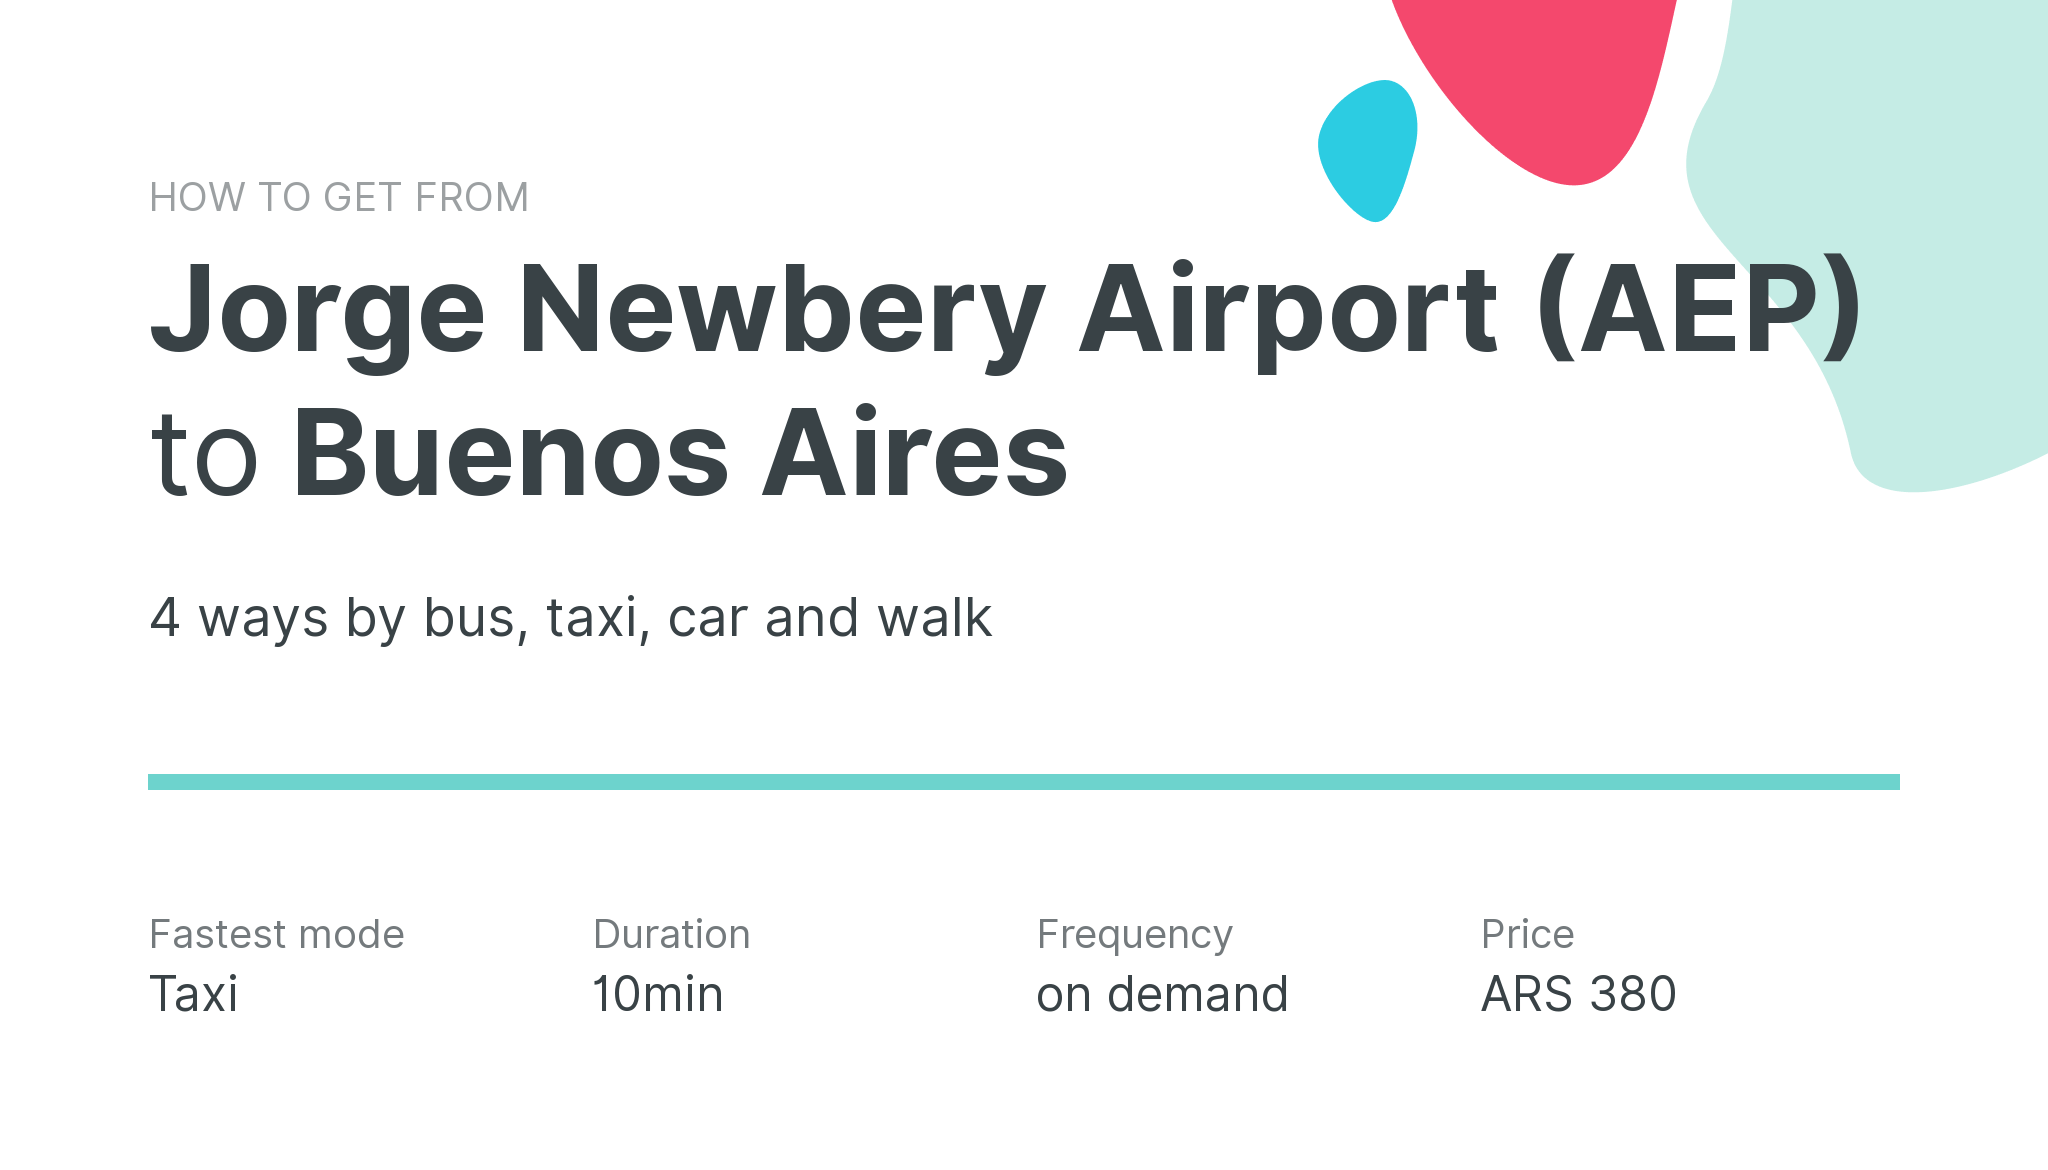 How do I get from Jorge Newbery Airport (AEP) to Buenos Aires